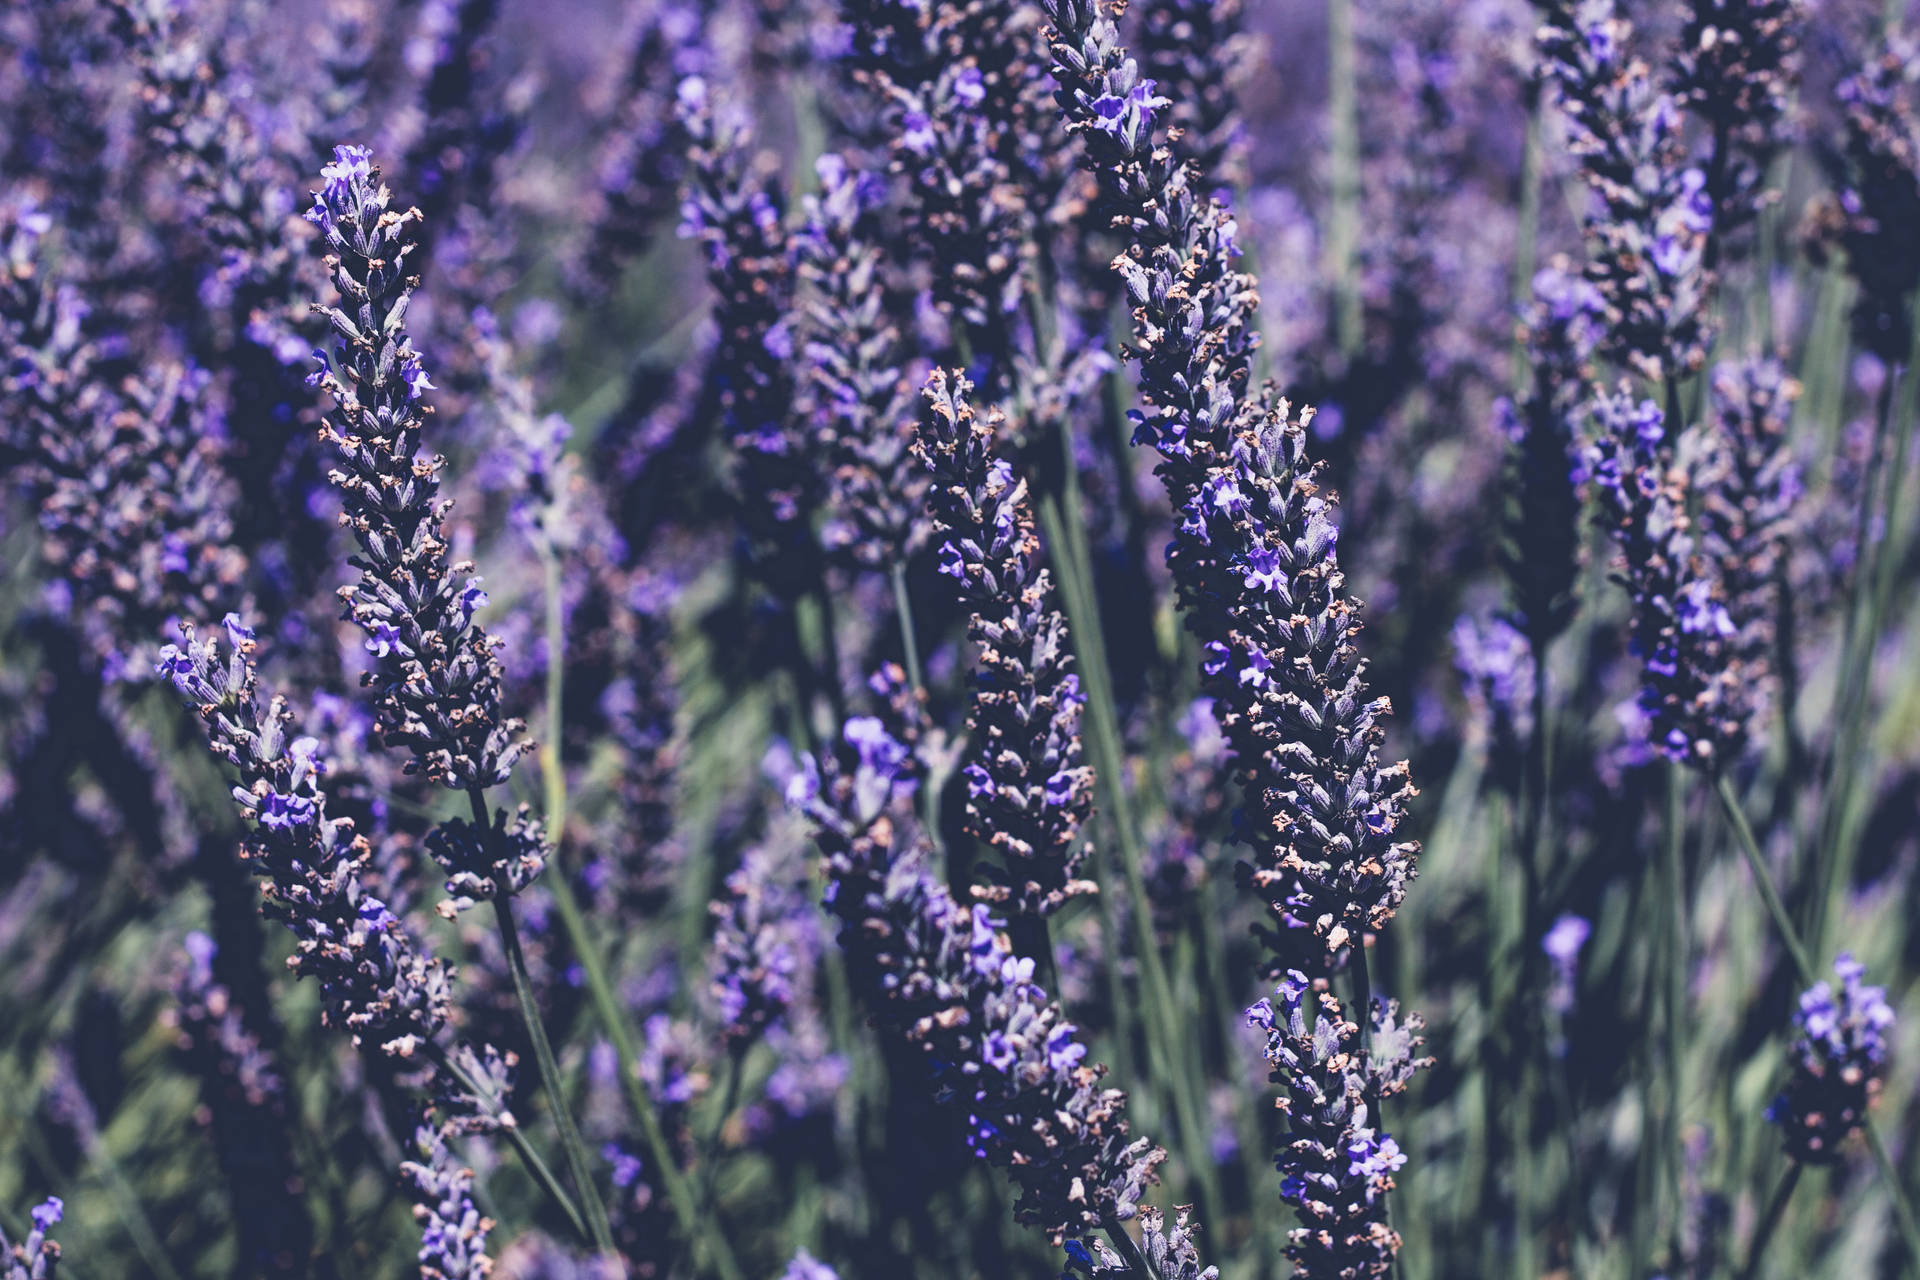 Lavender 4272X2848 Wallpaper and Background Image